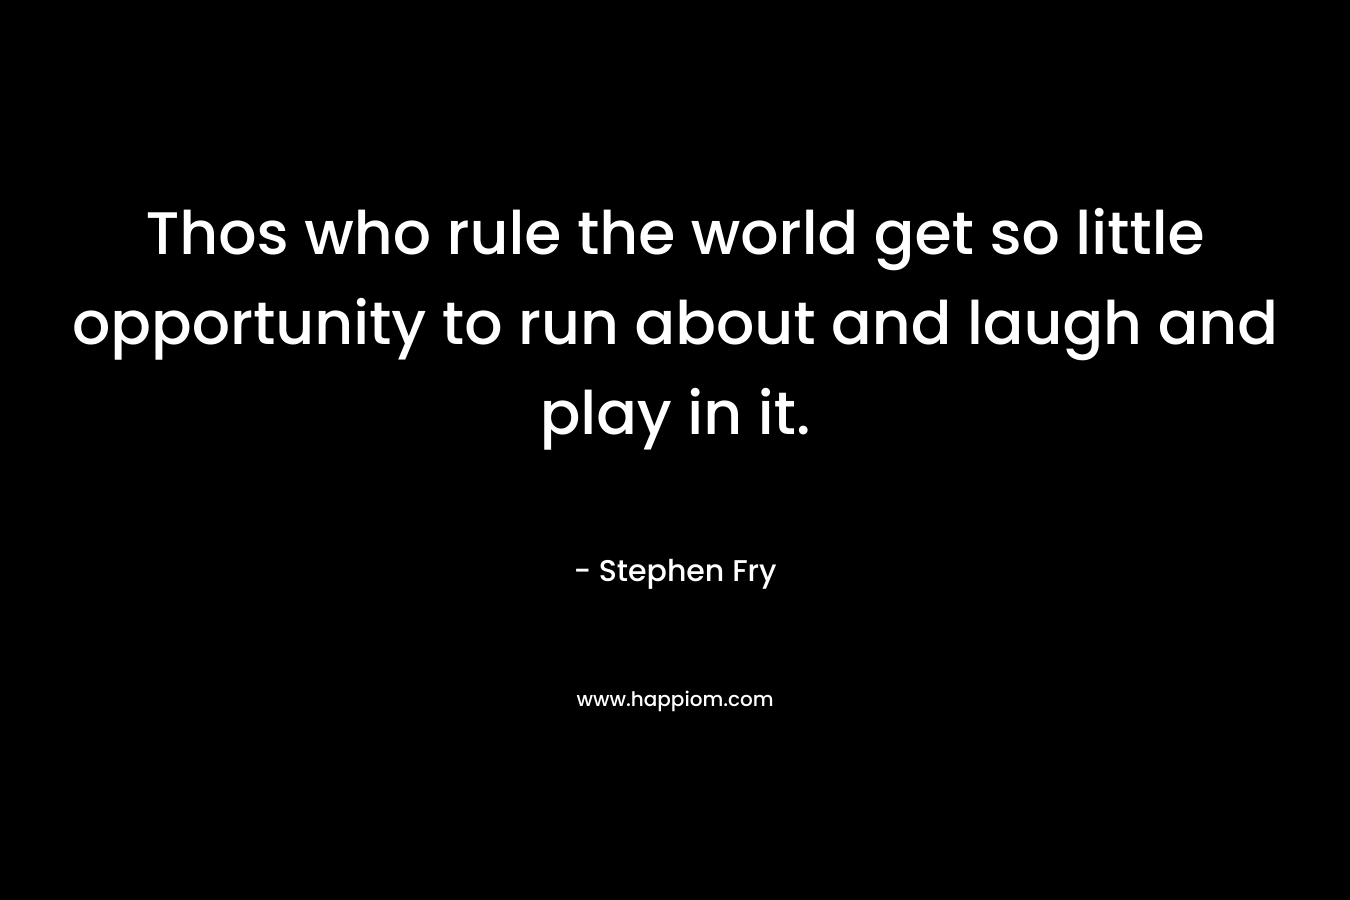 Thos who rule the world get so little opportunity to run about and laugh and play in it. – Stephen Fry